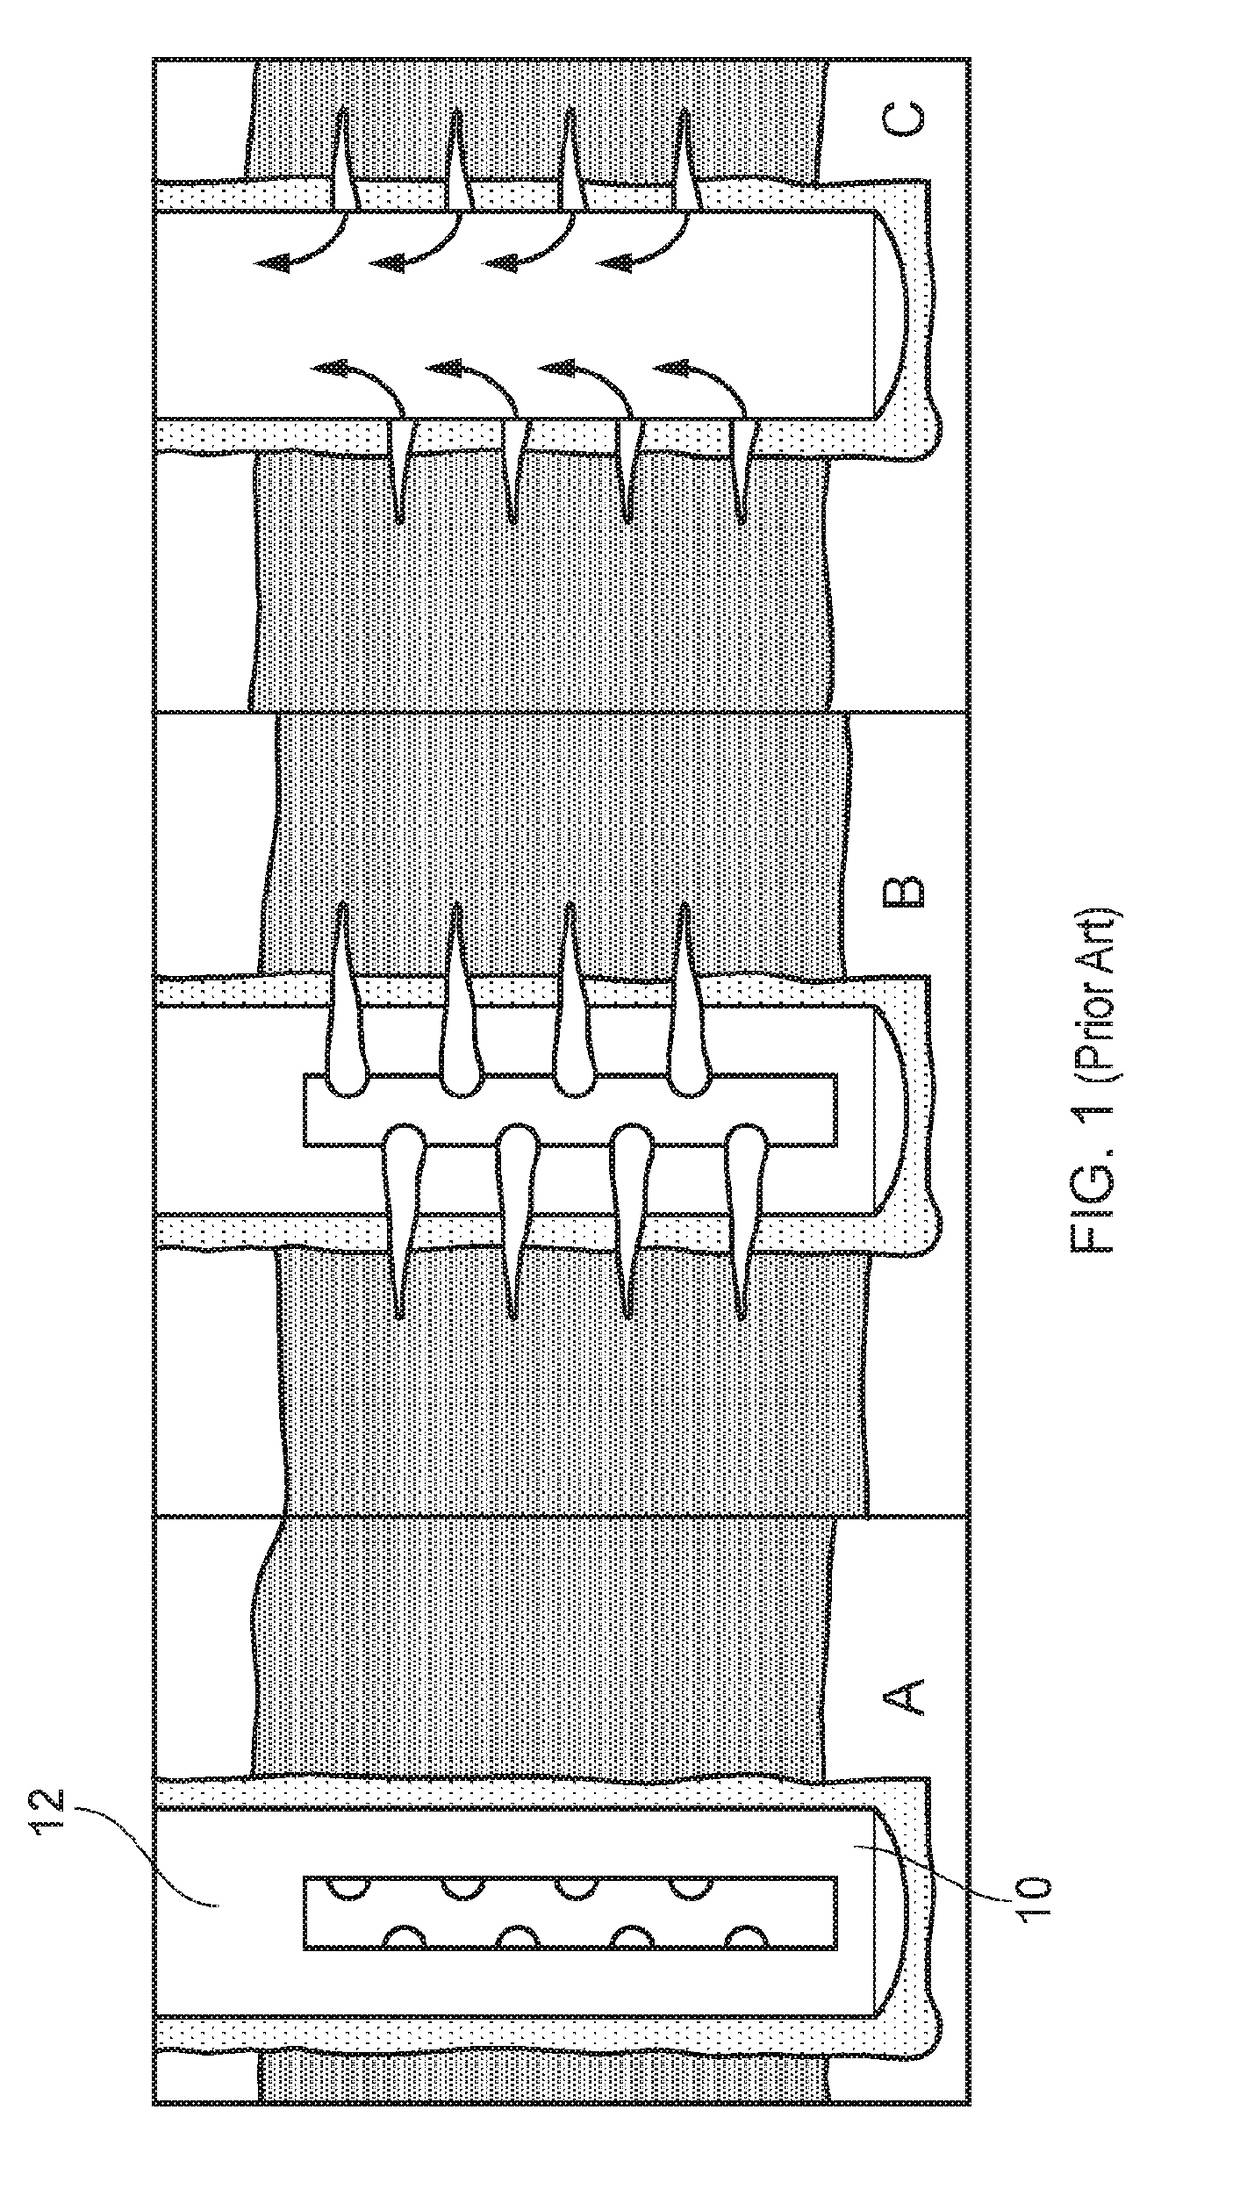 Method and system for determining downhole optical fiber orientation and/or location